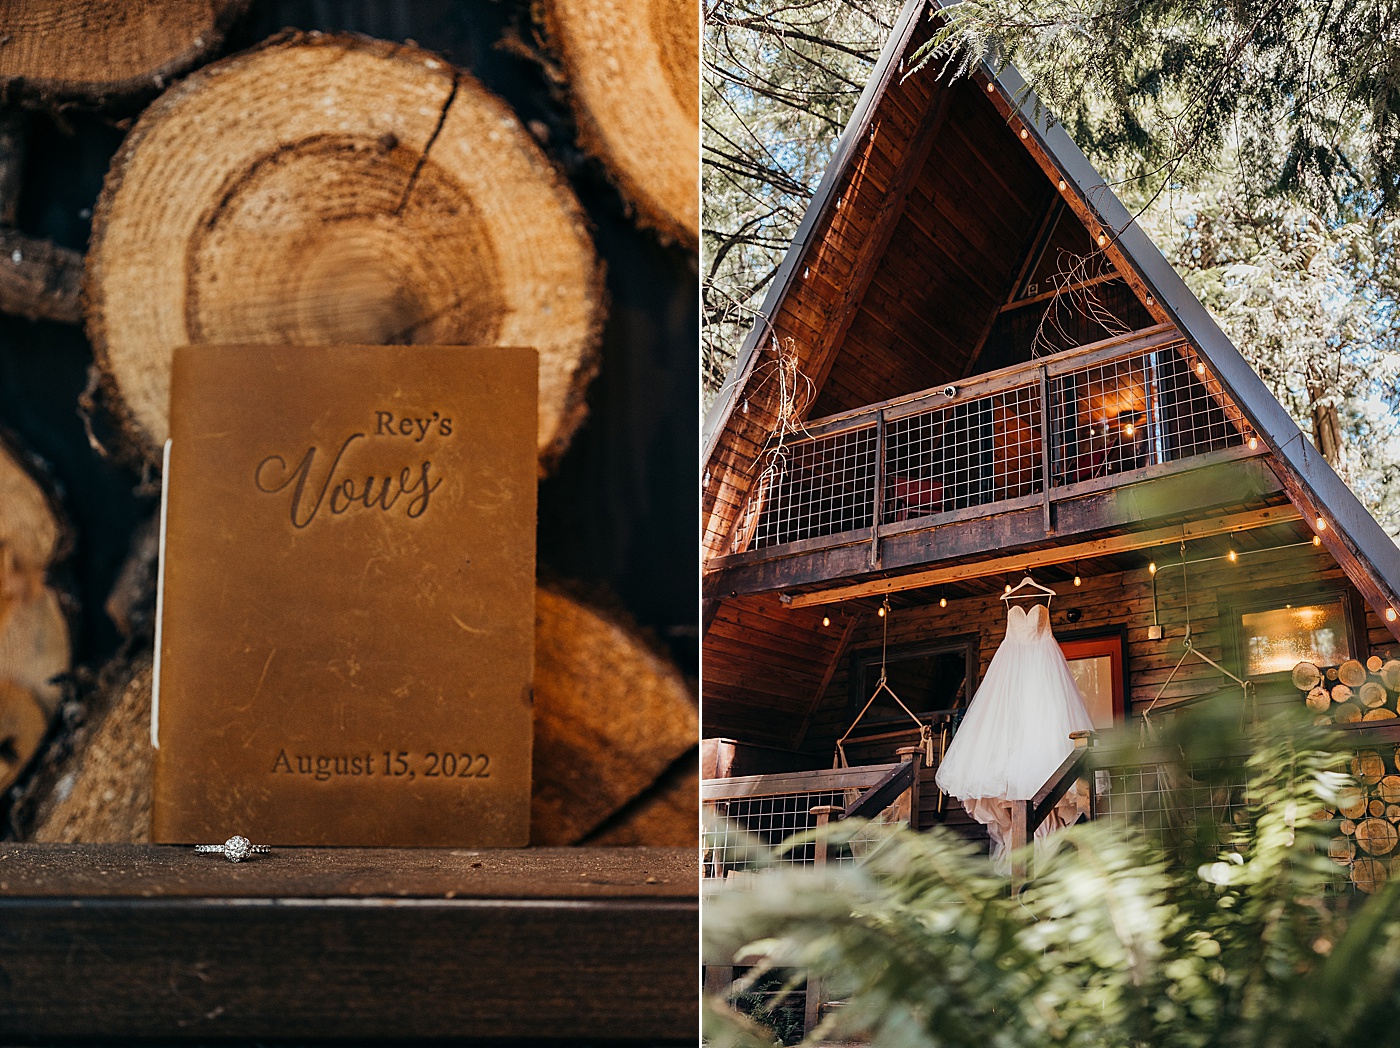 Wedding details at Airbnb in Mount Rainier | Photo by Megan Montalvo Photography